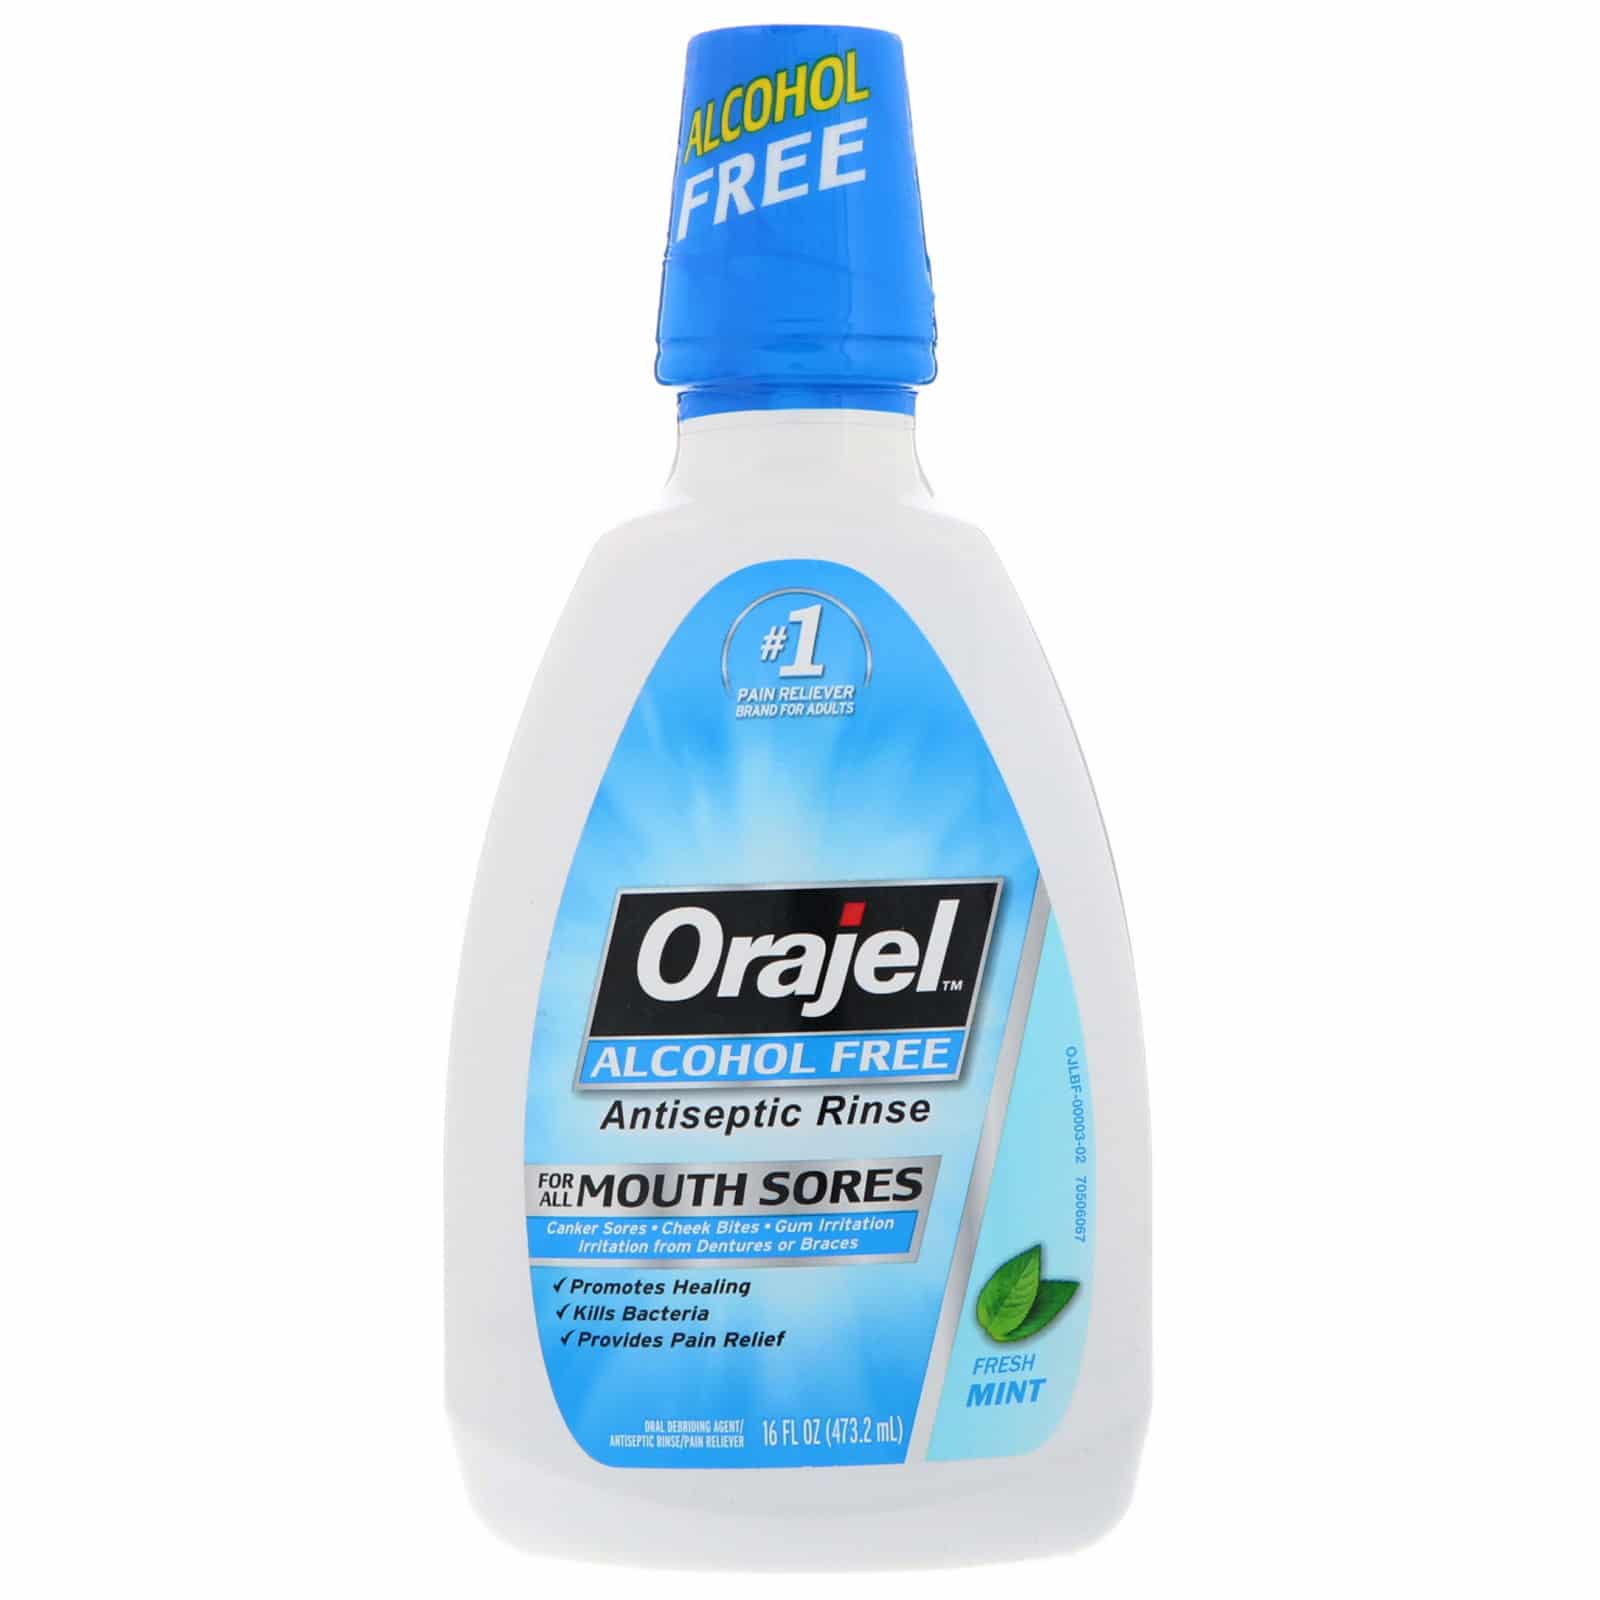 Orajel Antiseptic Rinse For All Mouth Sores Alcohol